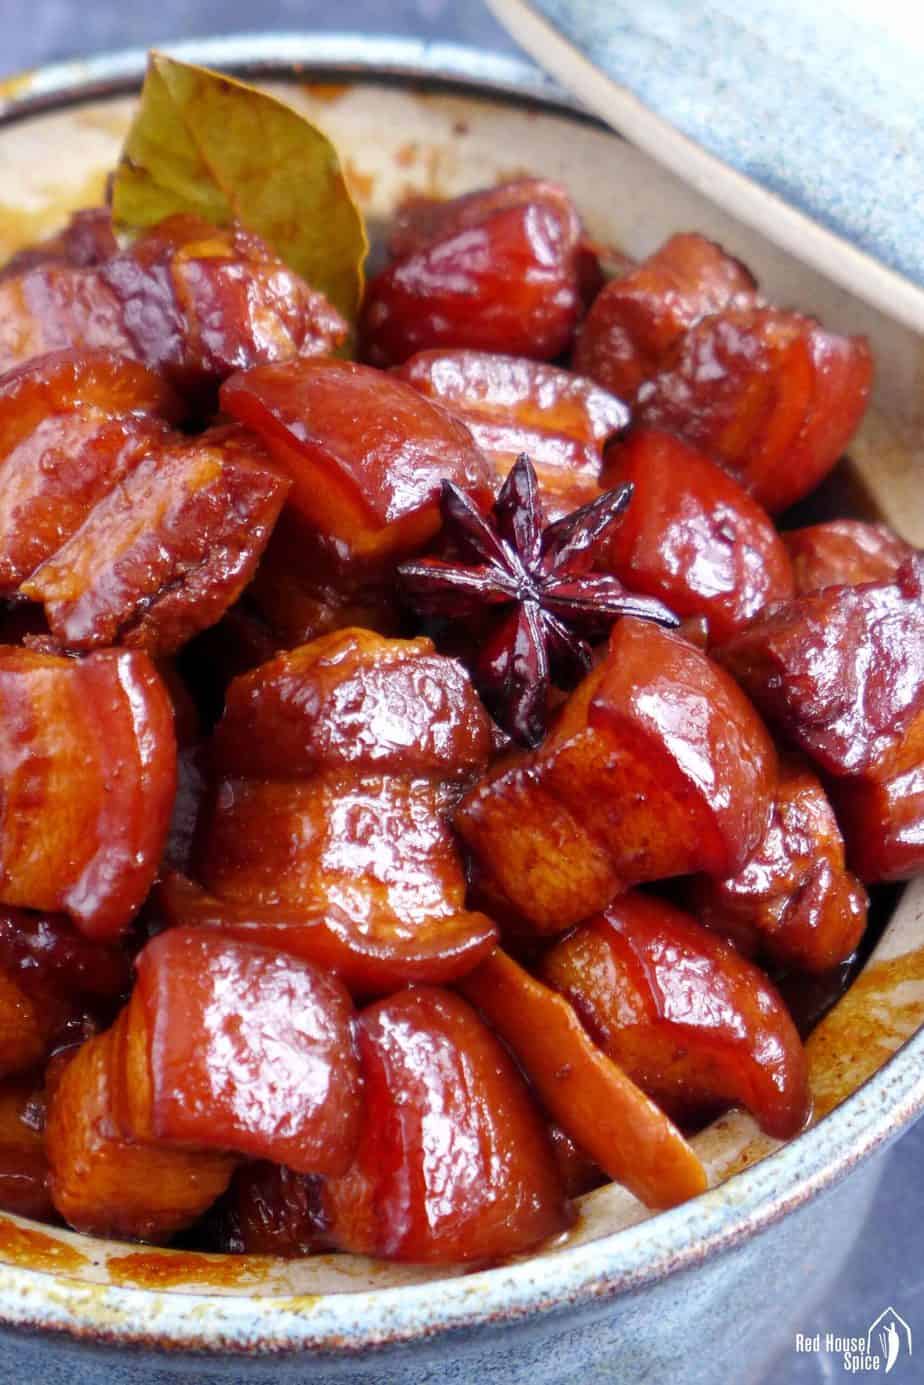 Braised pork belly cubes with spices